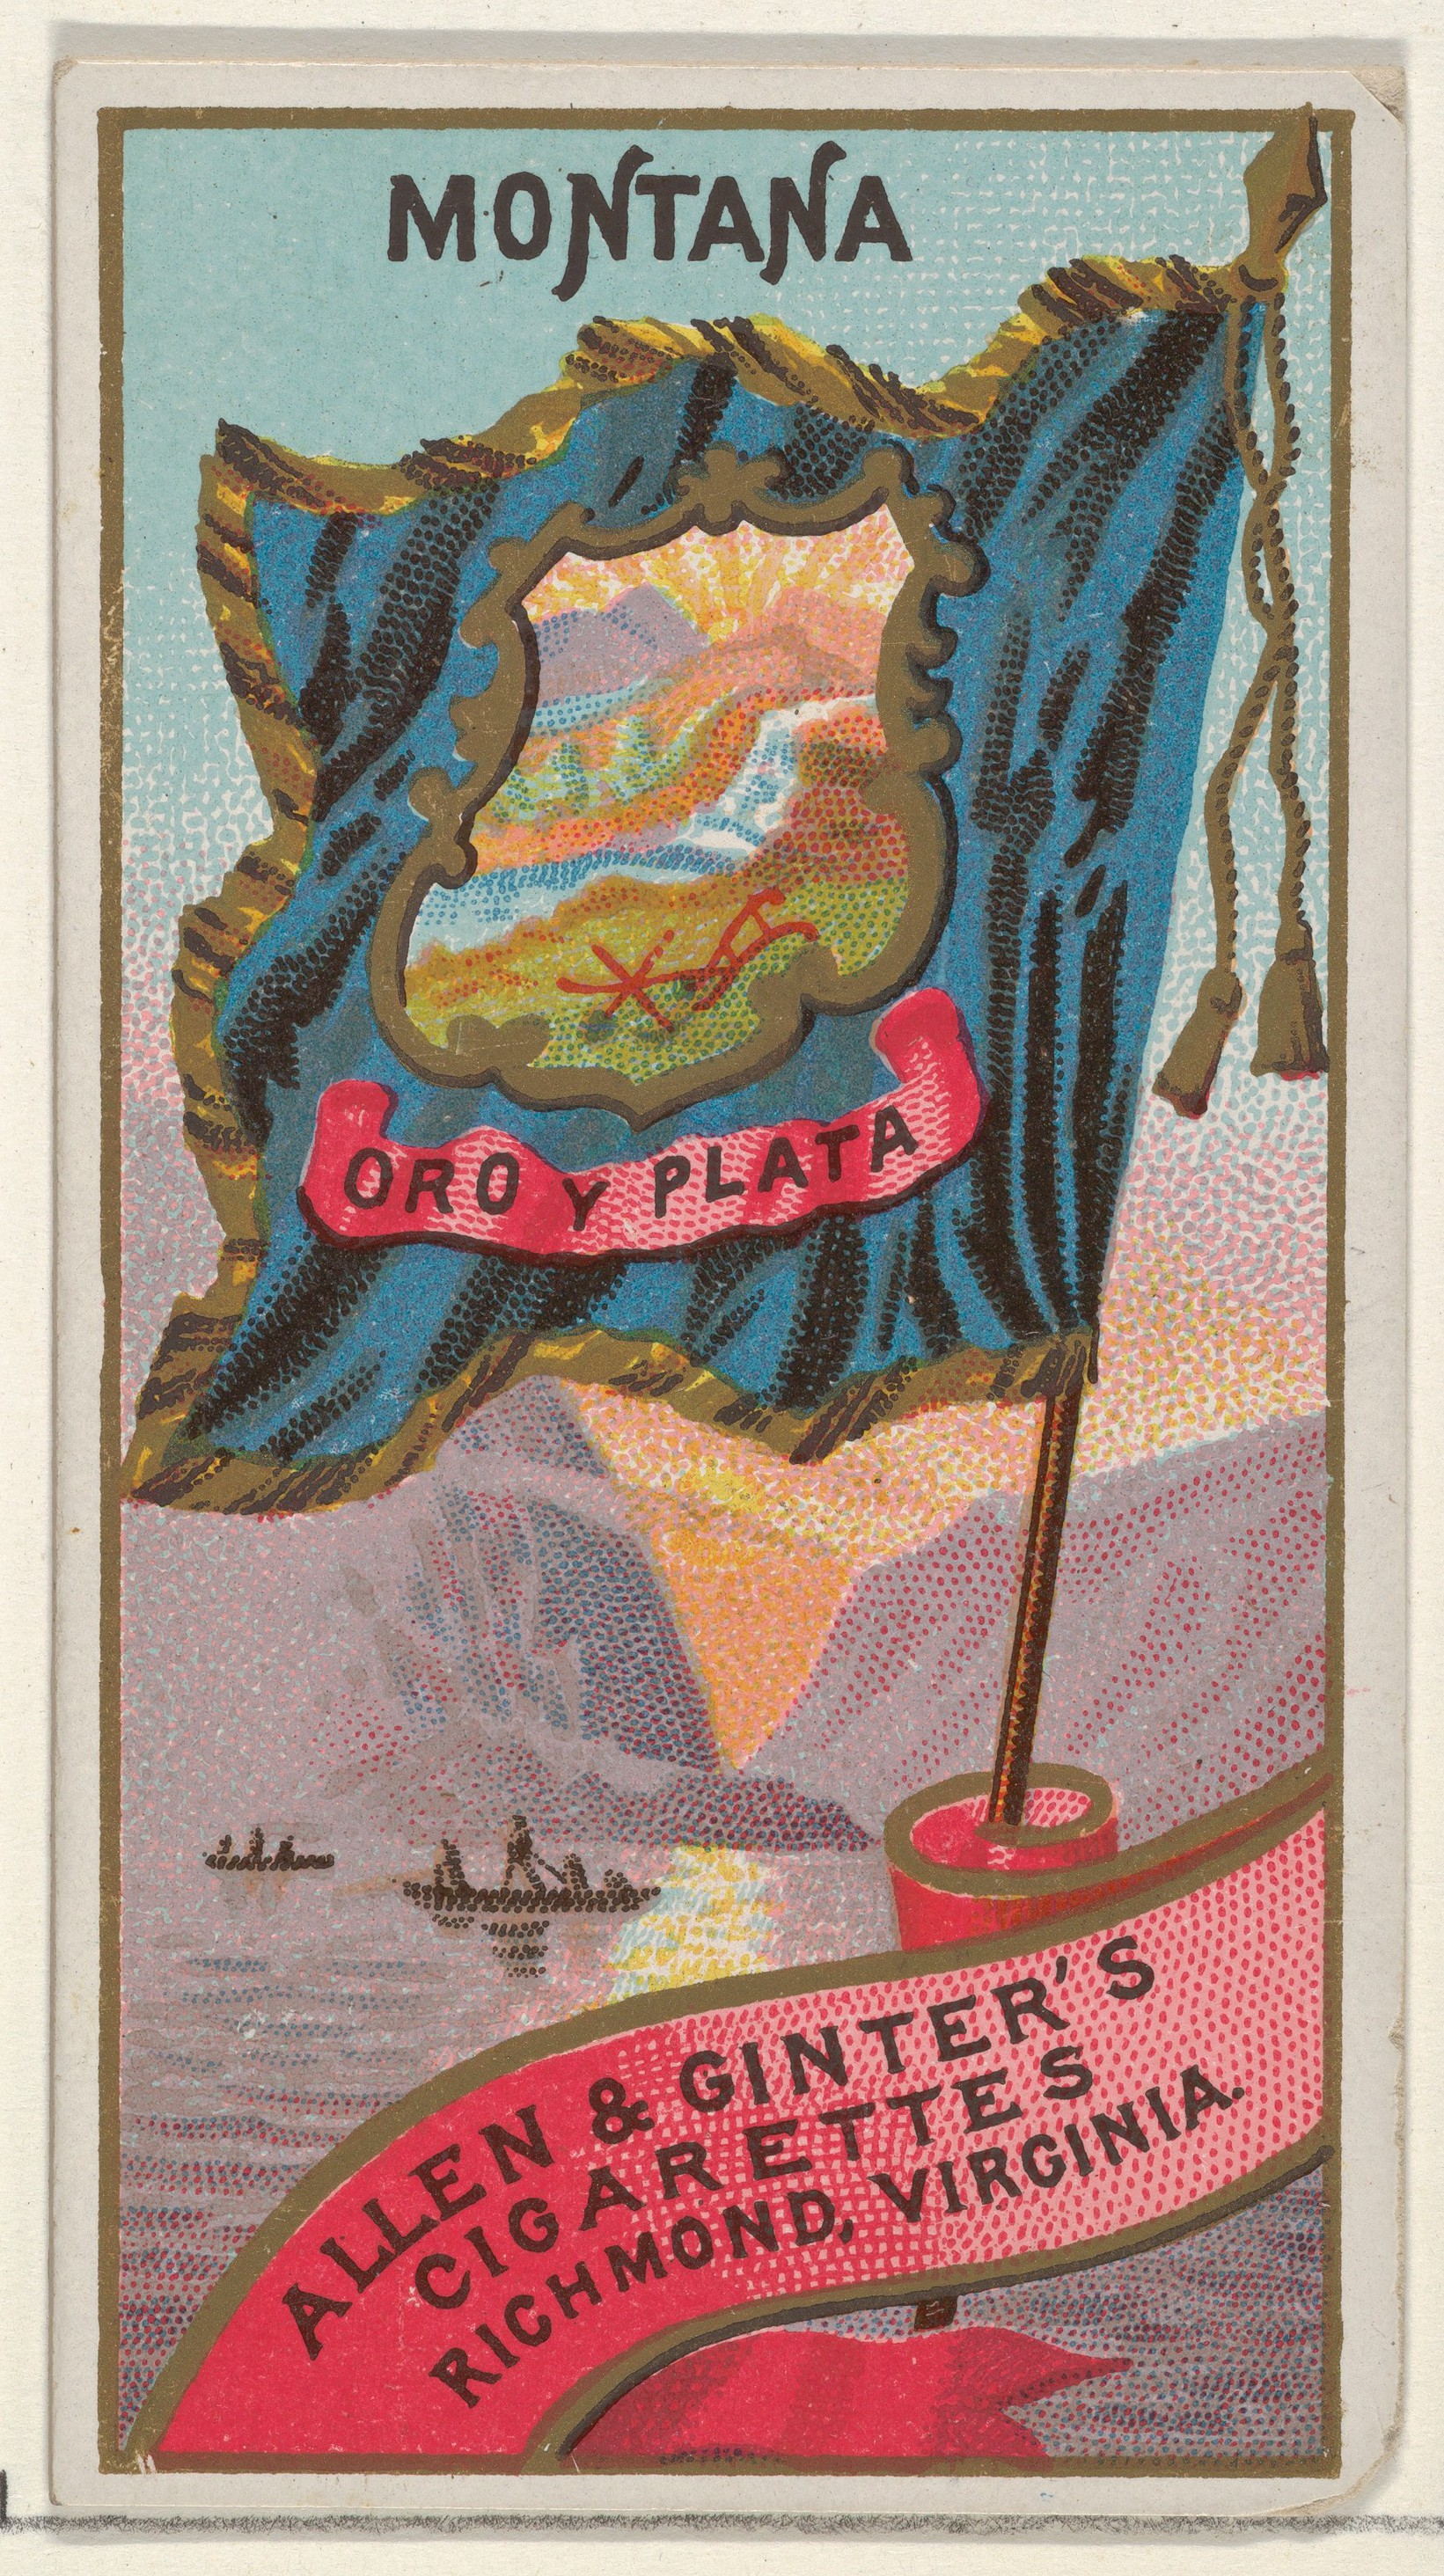 Issued by Allen & Ginter Montana, from Flags of the States and